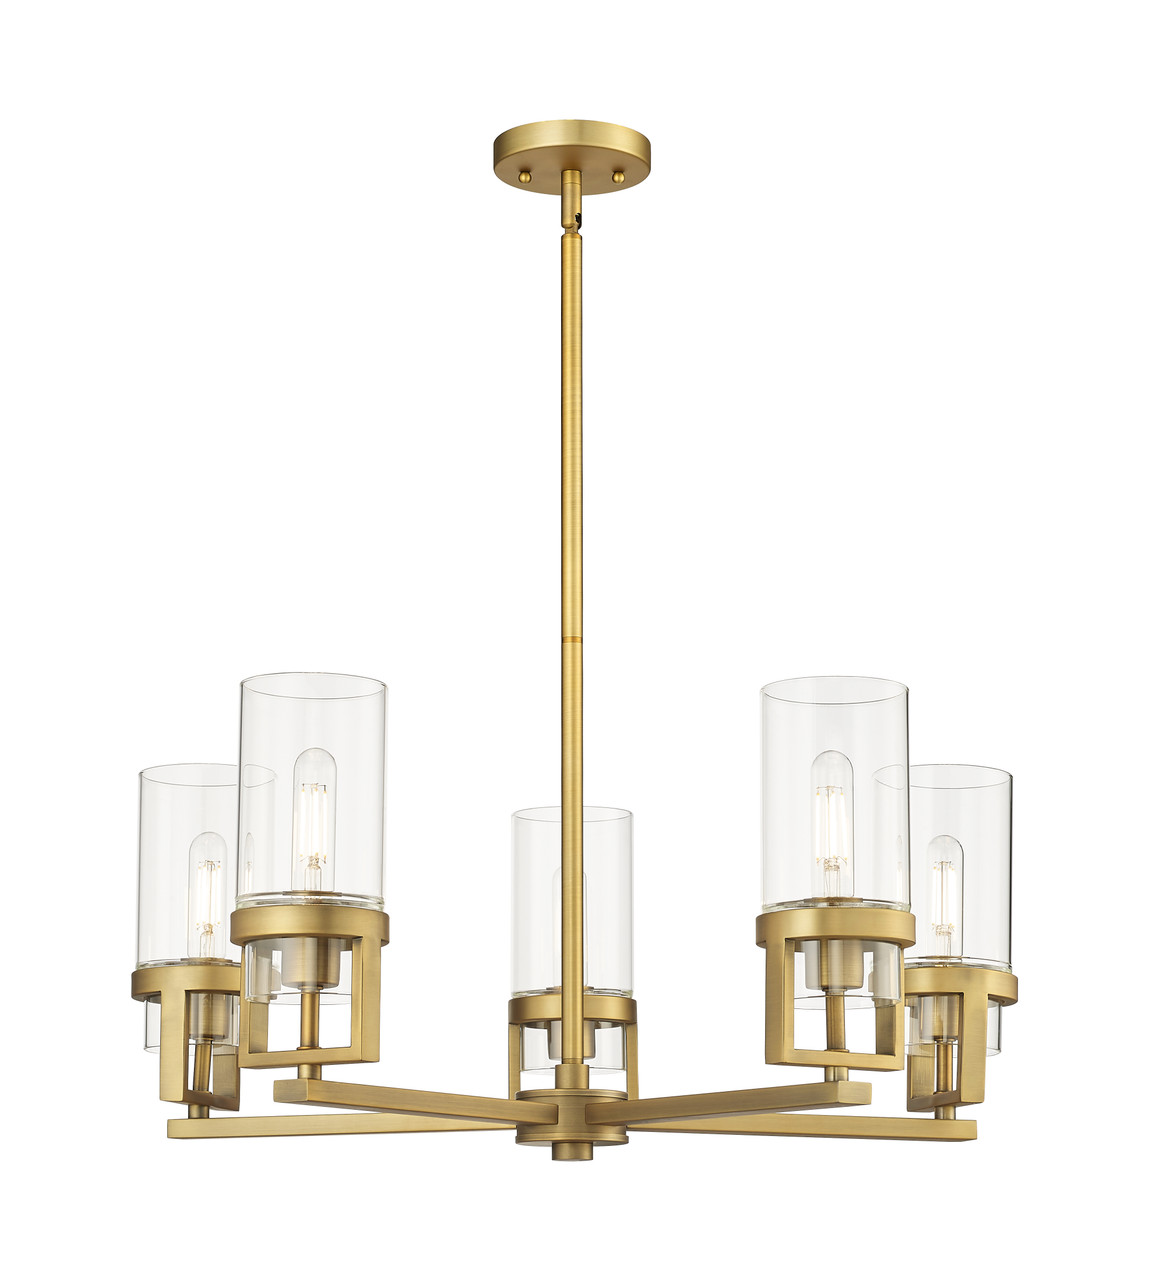 INNOVATIONS 426-5CR-BB-G426-8CL Utopia 5 24 inch Chandelier Brushed Brass